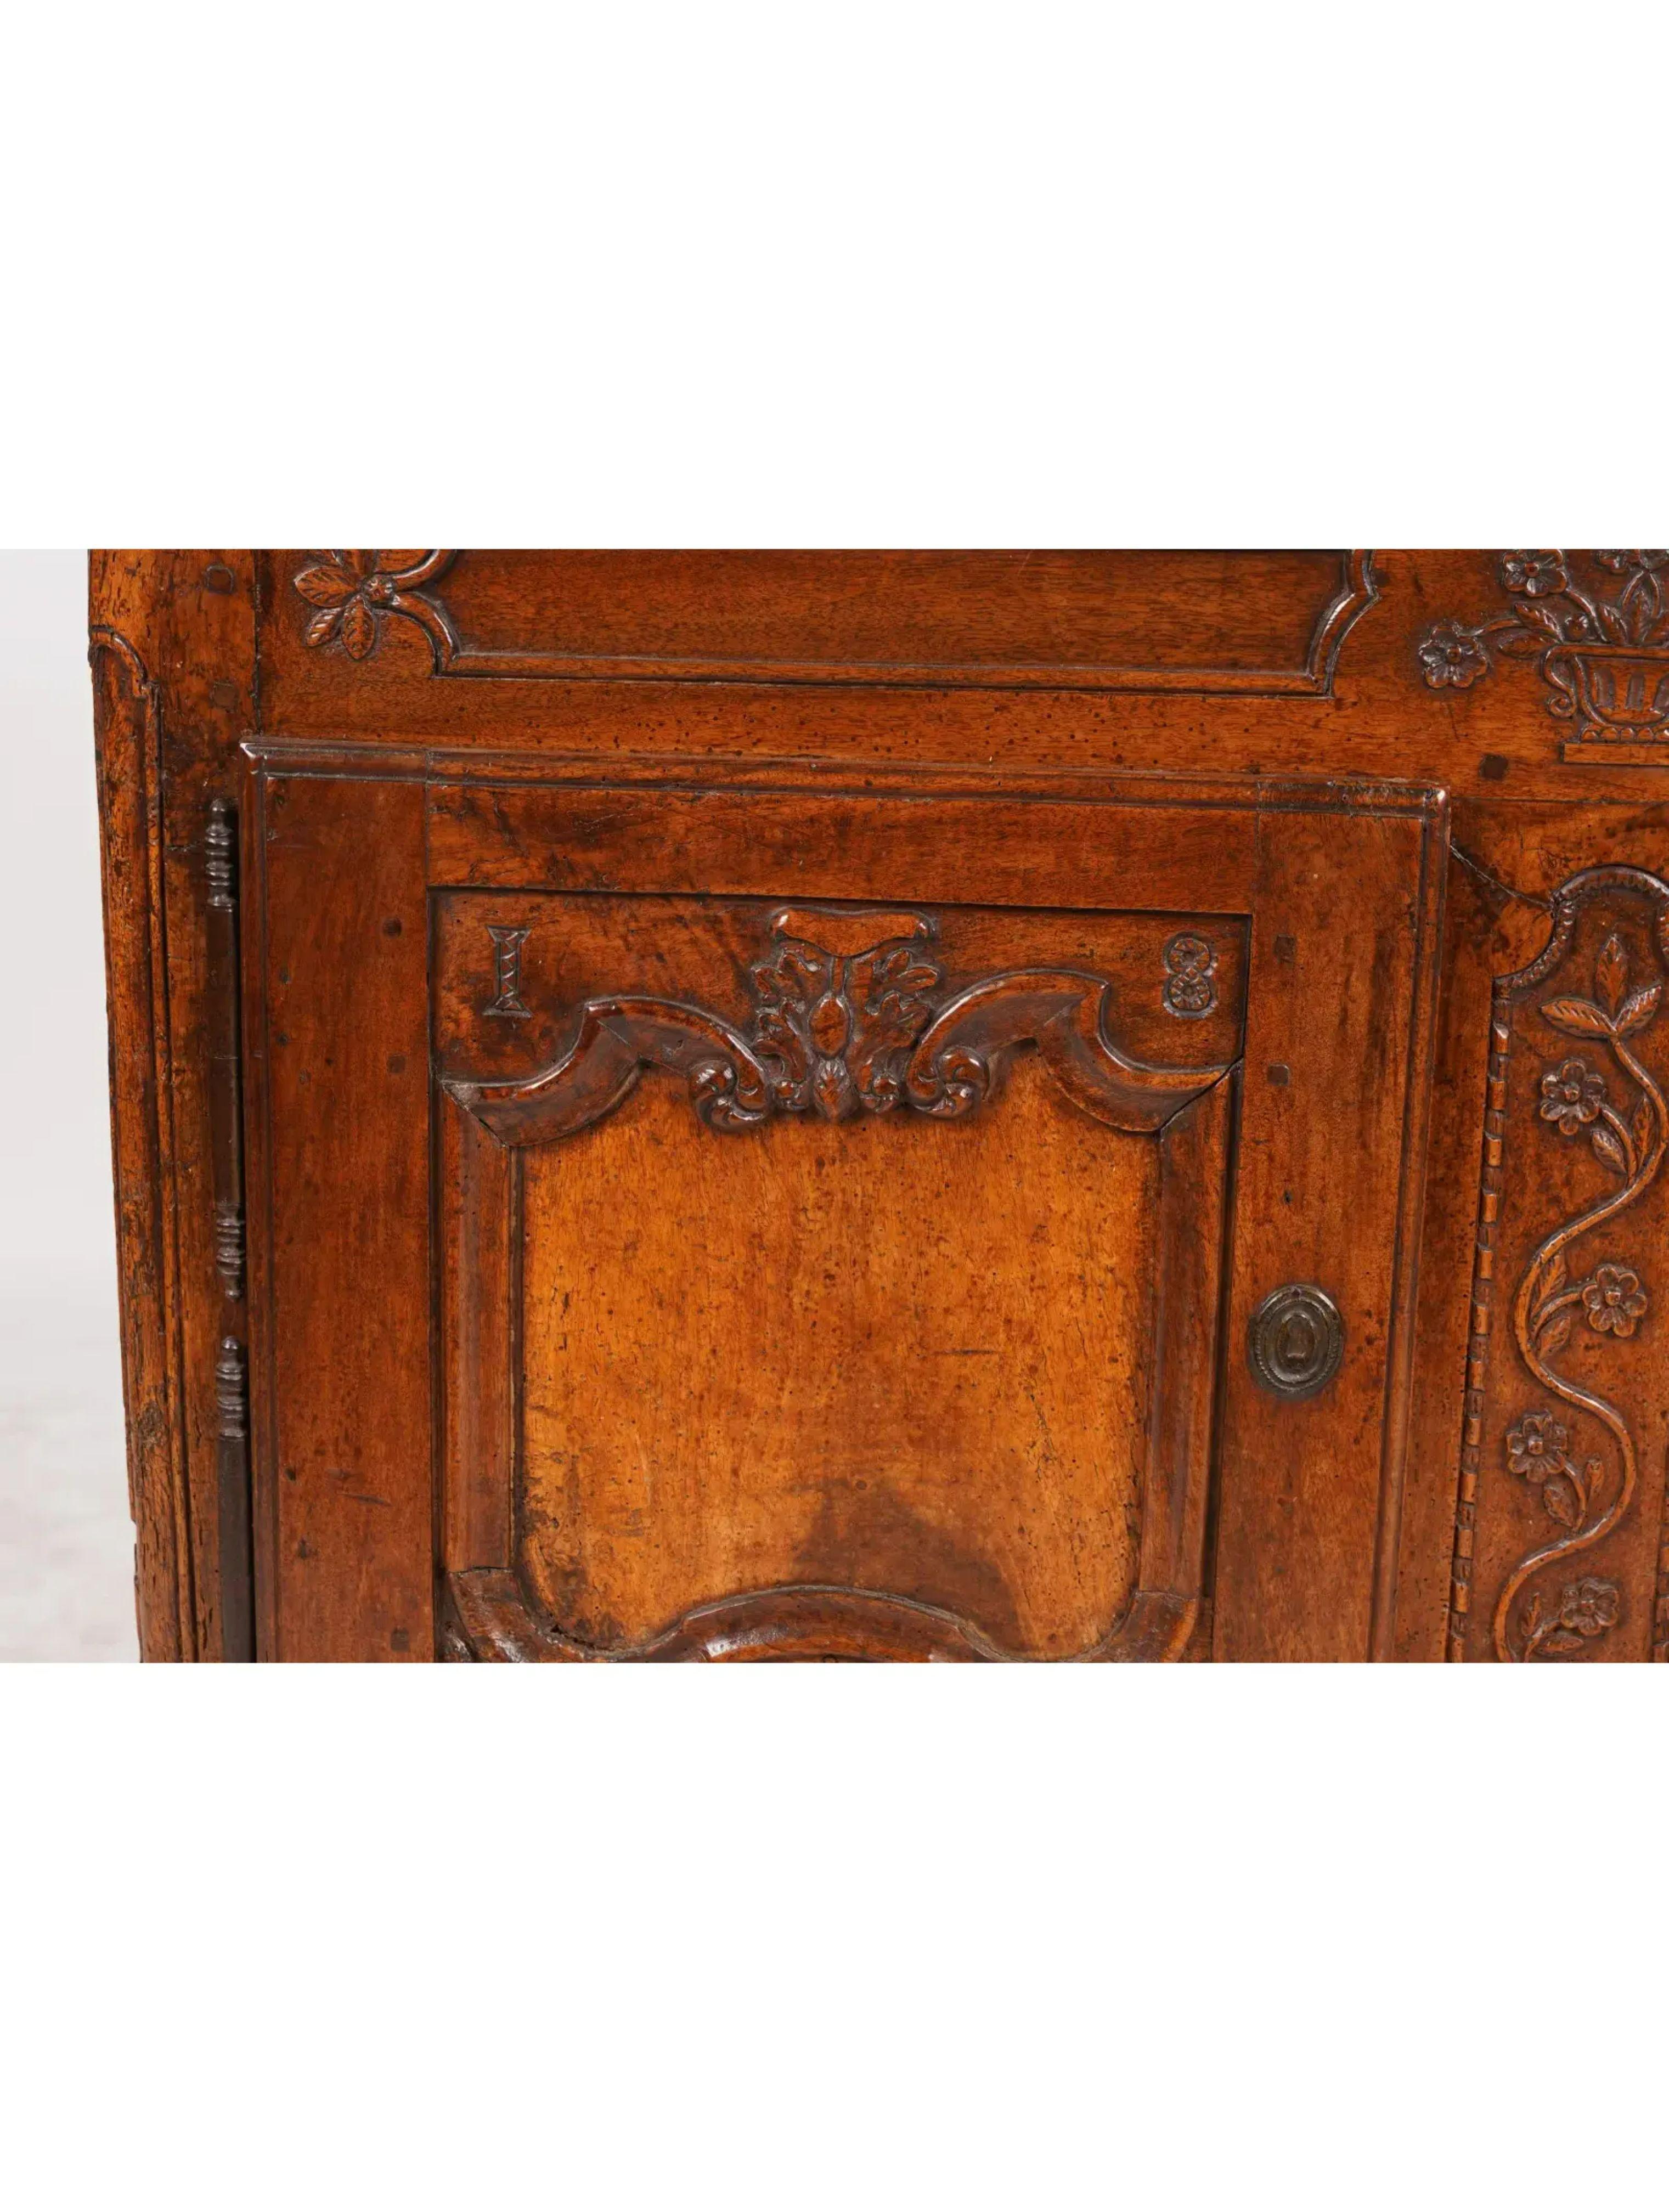 Antique 18th C French provincial fruitwood sideboard buffet

Additional information: 
Materials: Fruitwood
Color: Sienna
Period: 18th Century
Styles: French Country, French Provincial
Item Type: Vintage, Antique or Pre-owned
Dimensions: 50